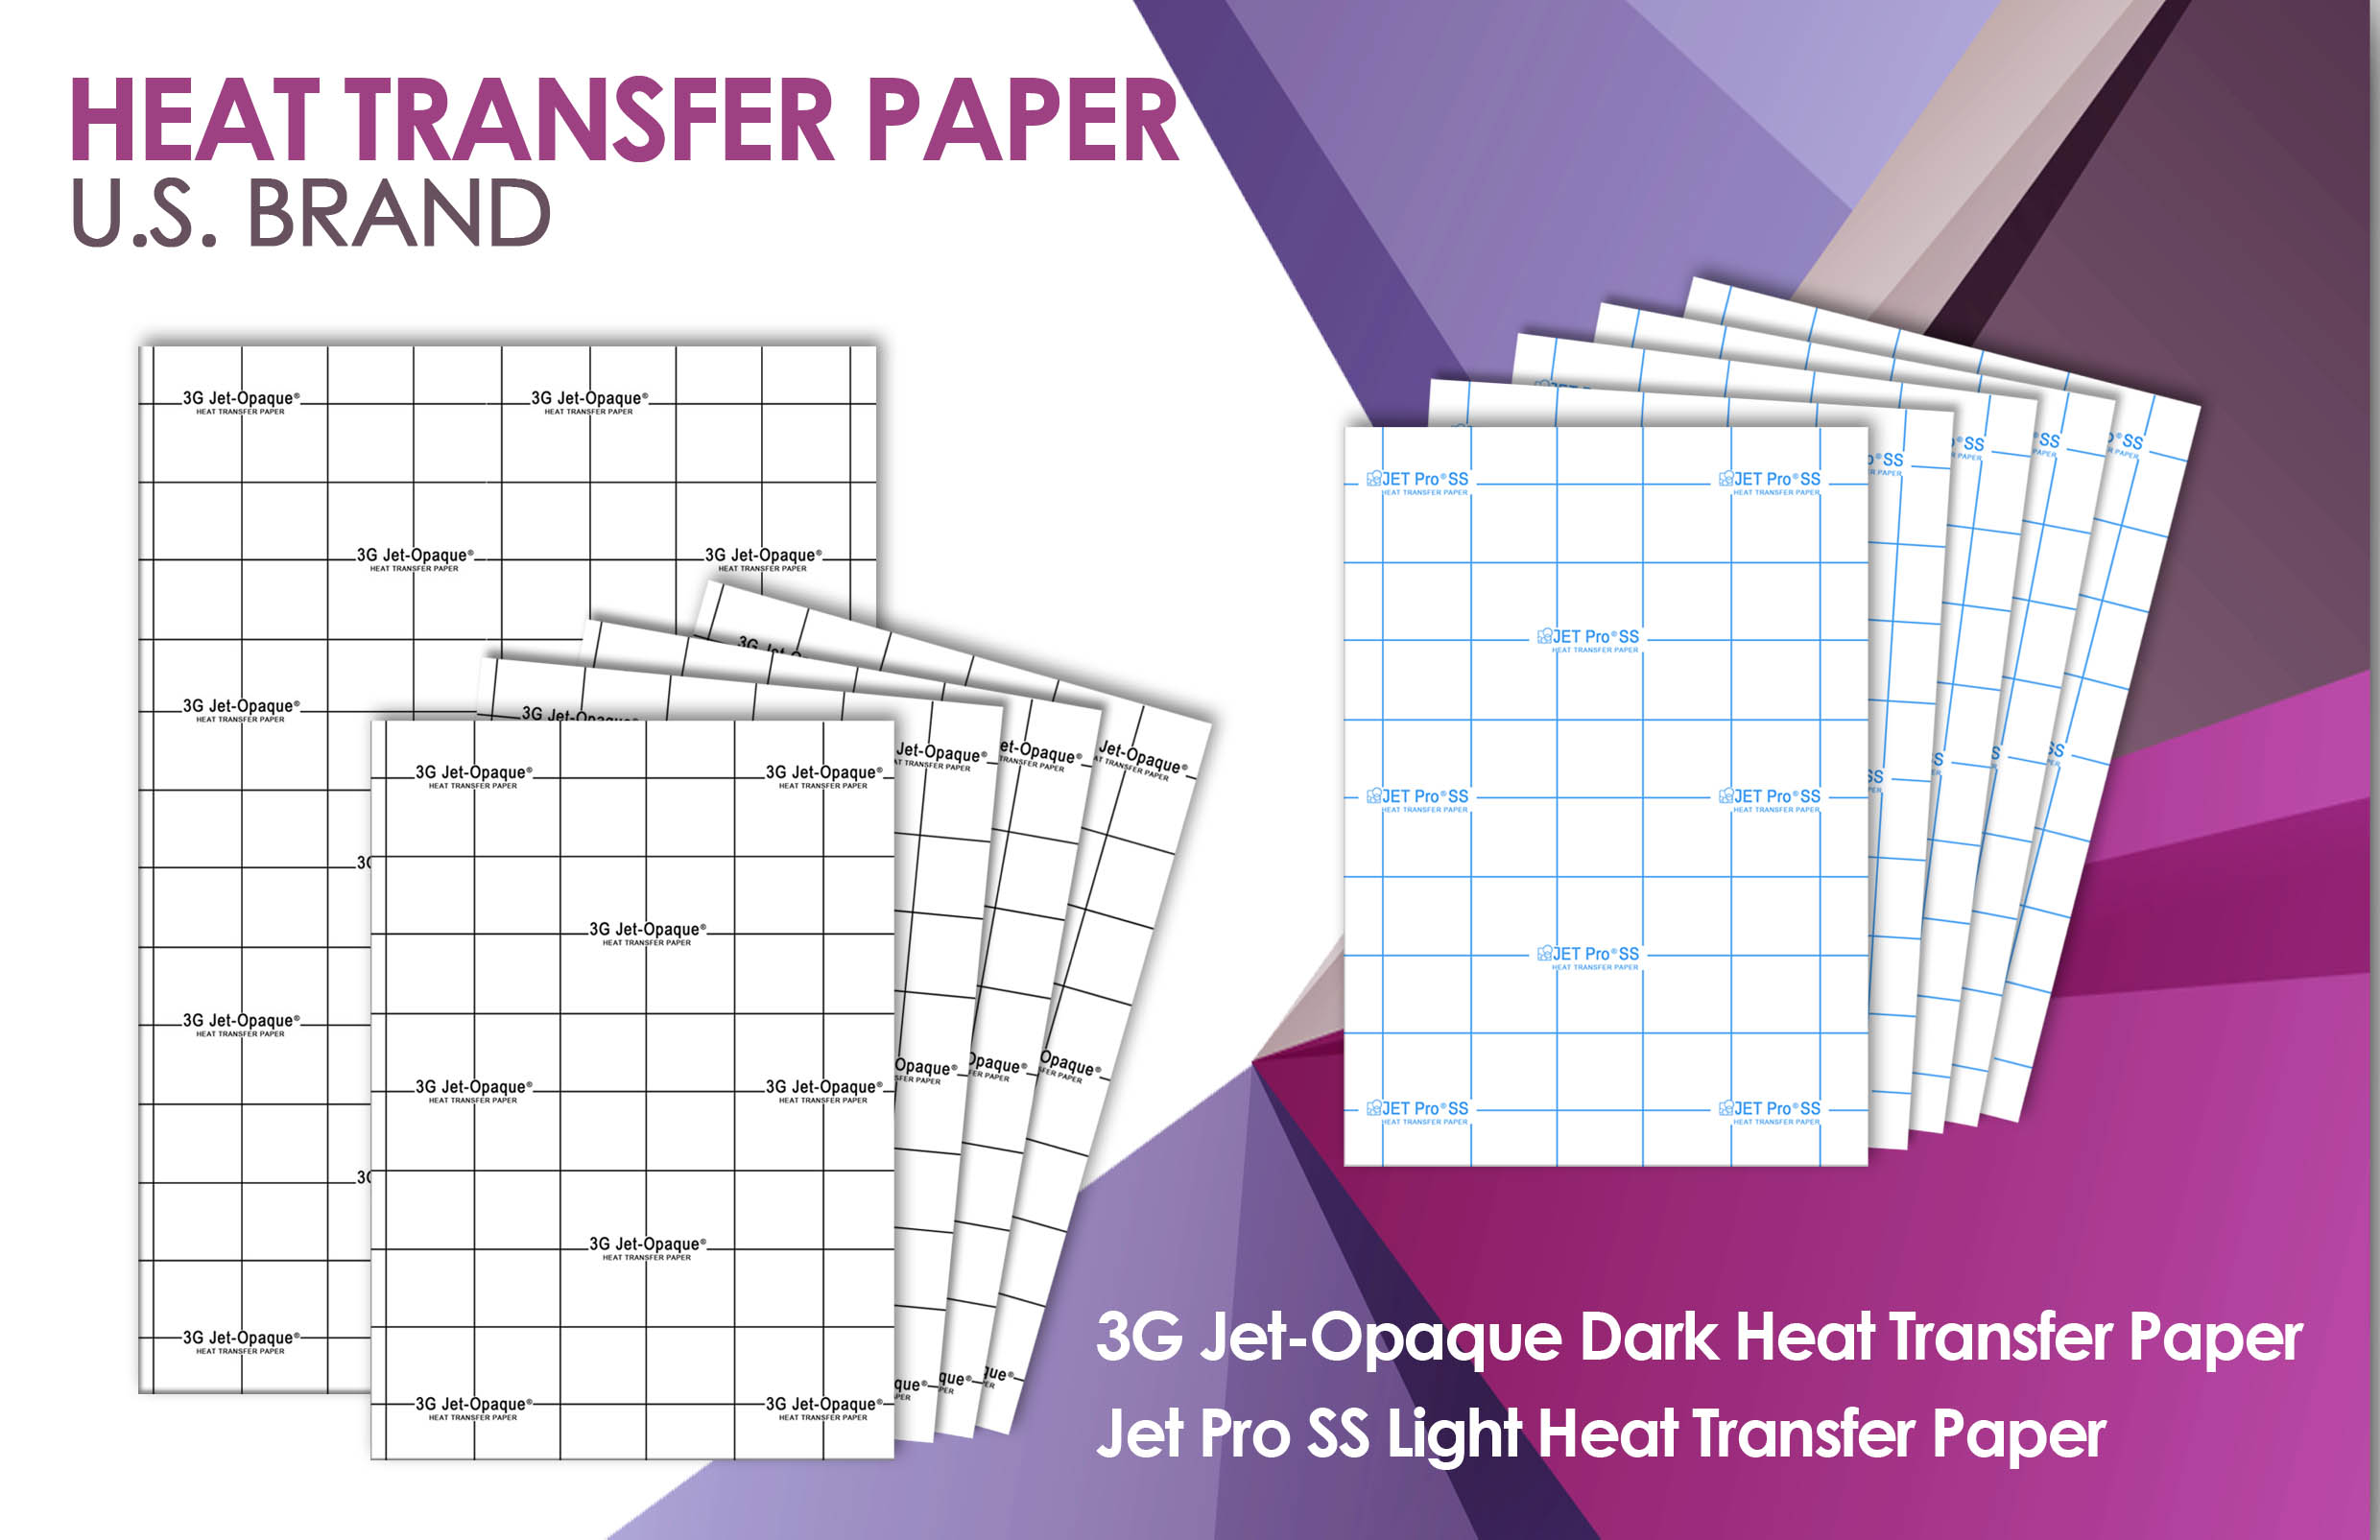 Where to Buy Heat Transfer Paper